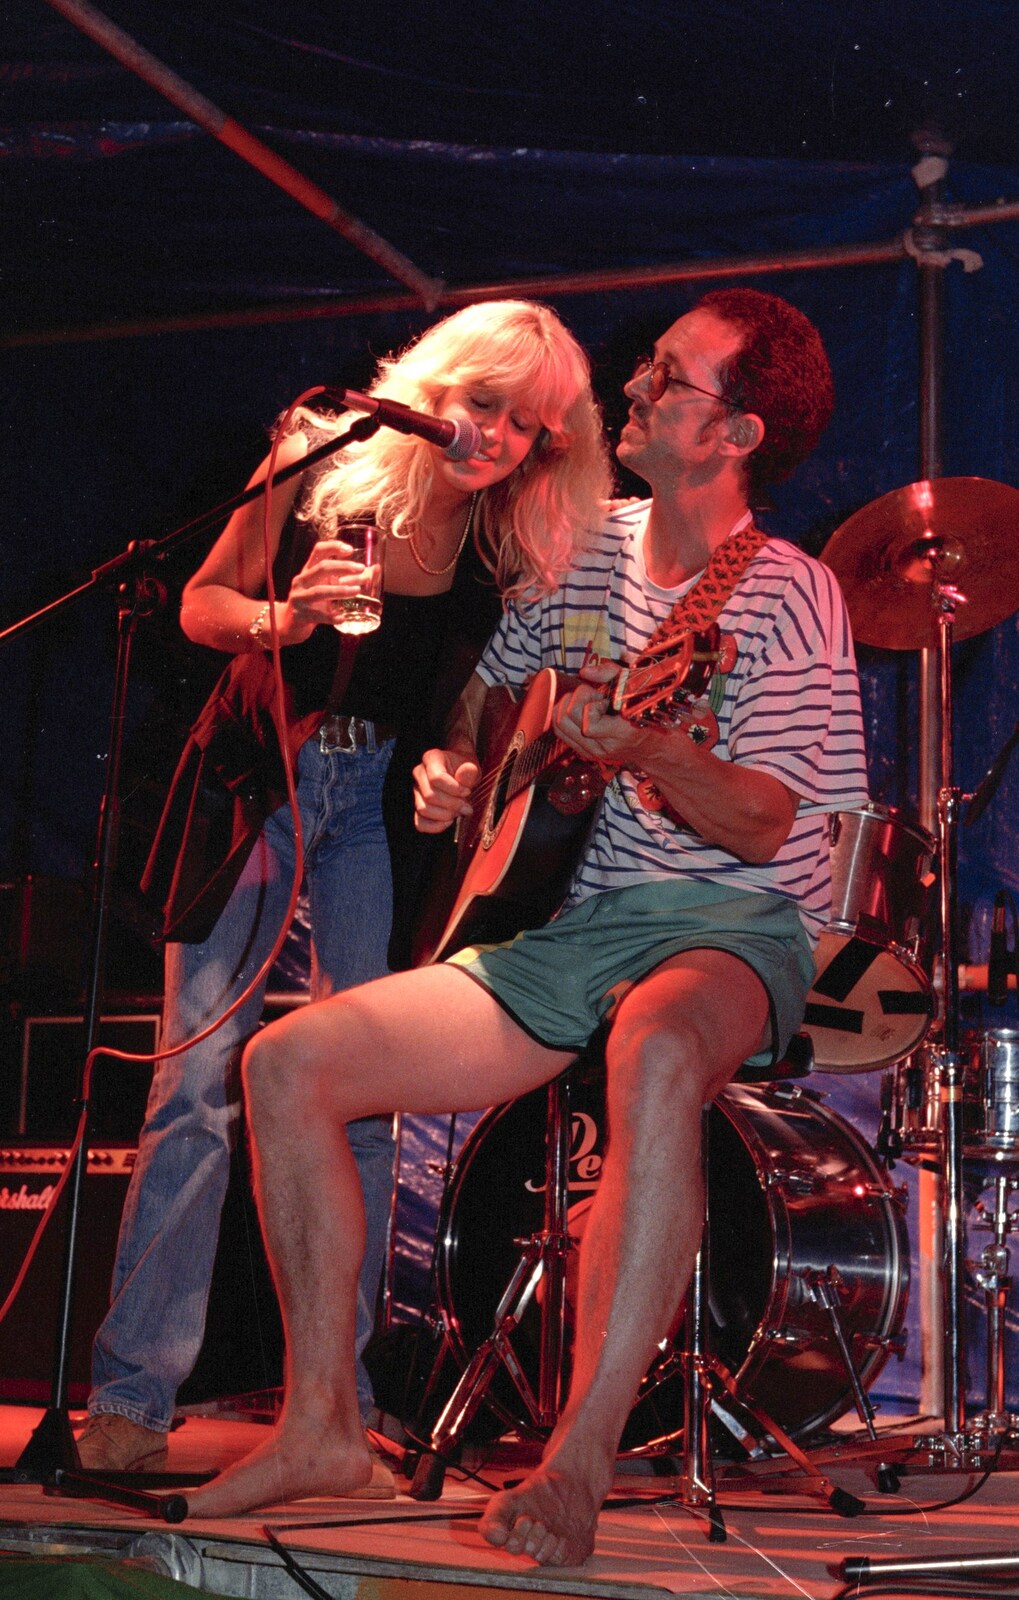 A duet moment from Sean's ElstedBury Festival, Elsted, West Sussex - 12th July 1996